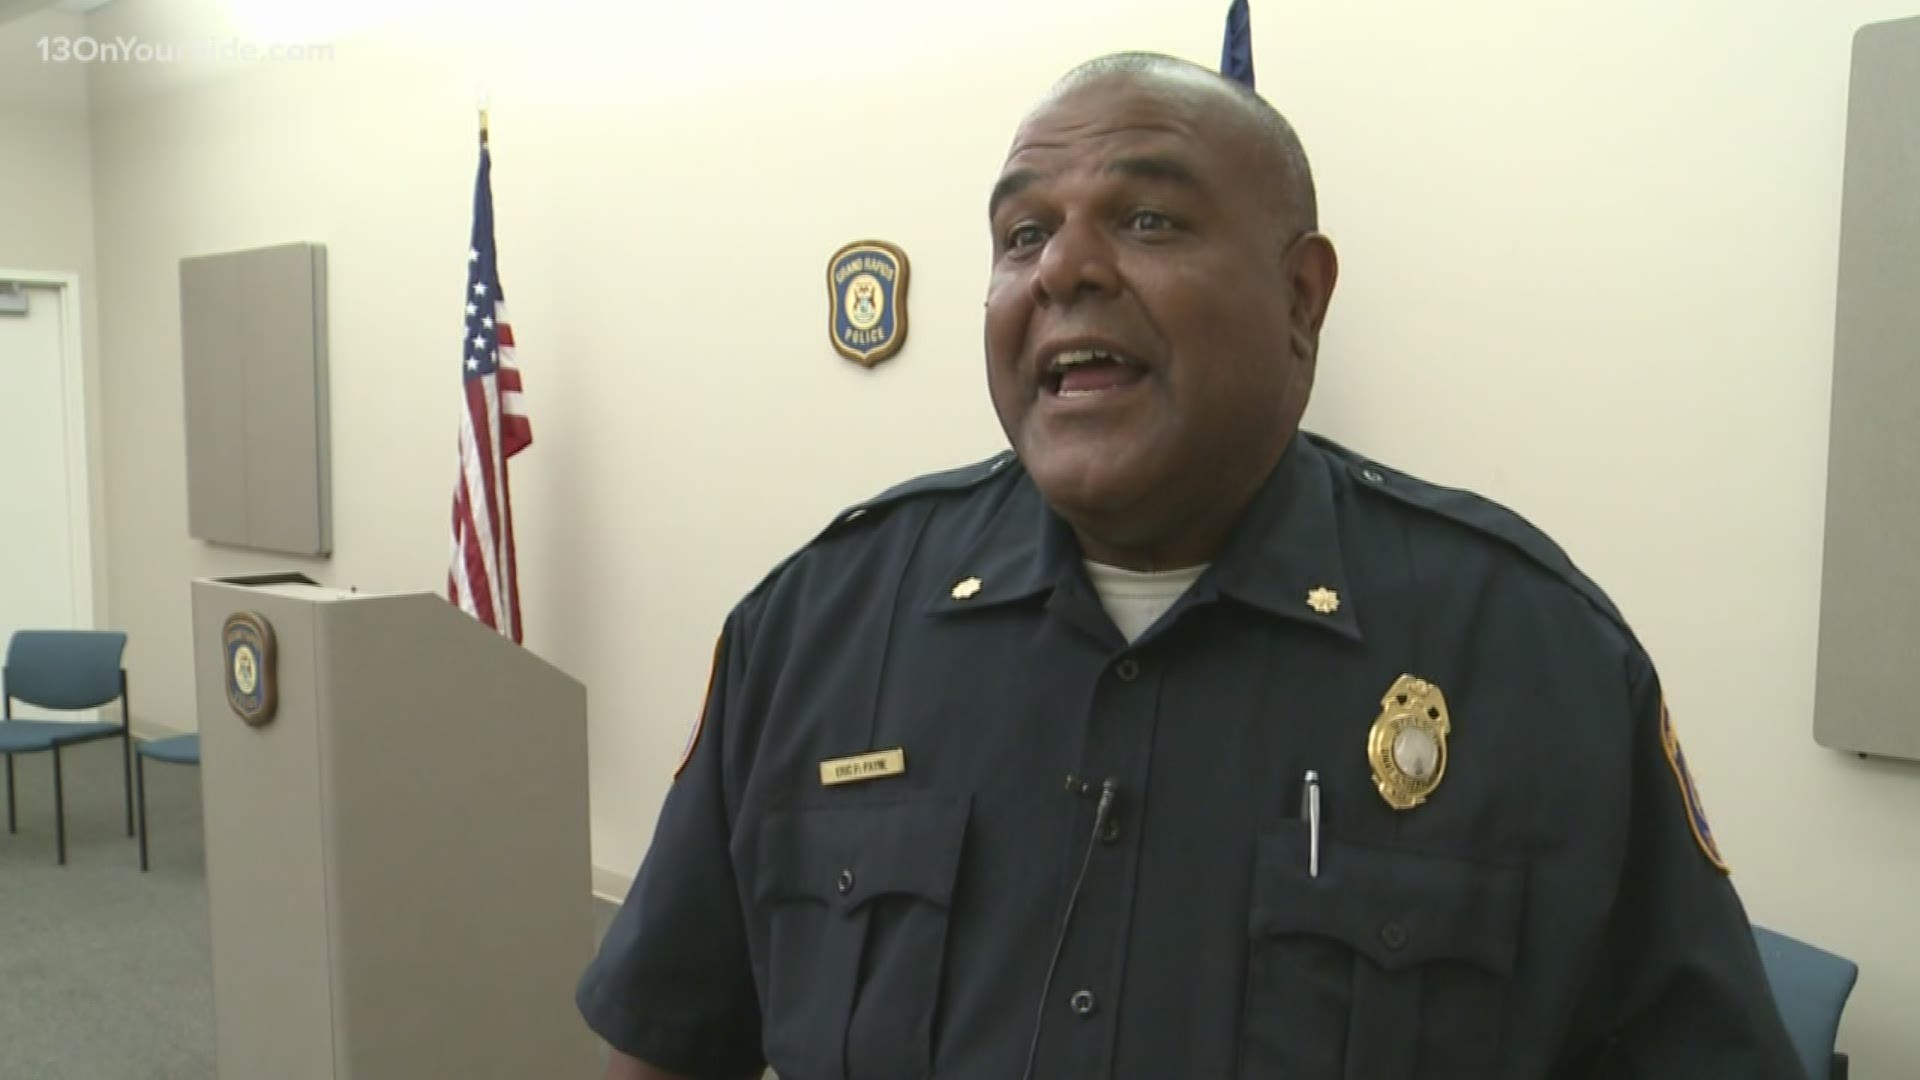 Eric Payne named new police chief in Grand Rapids